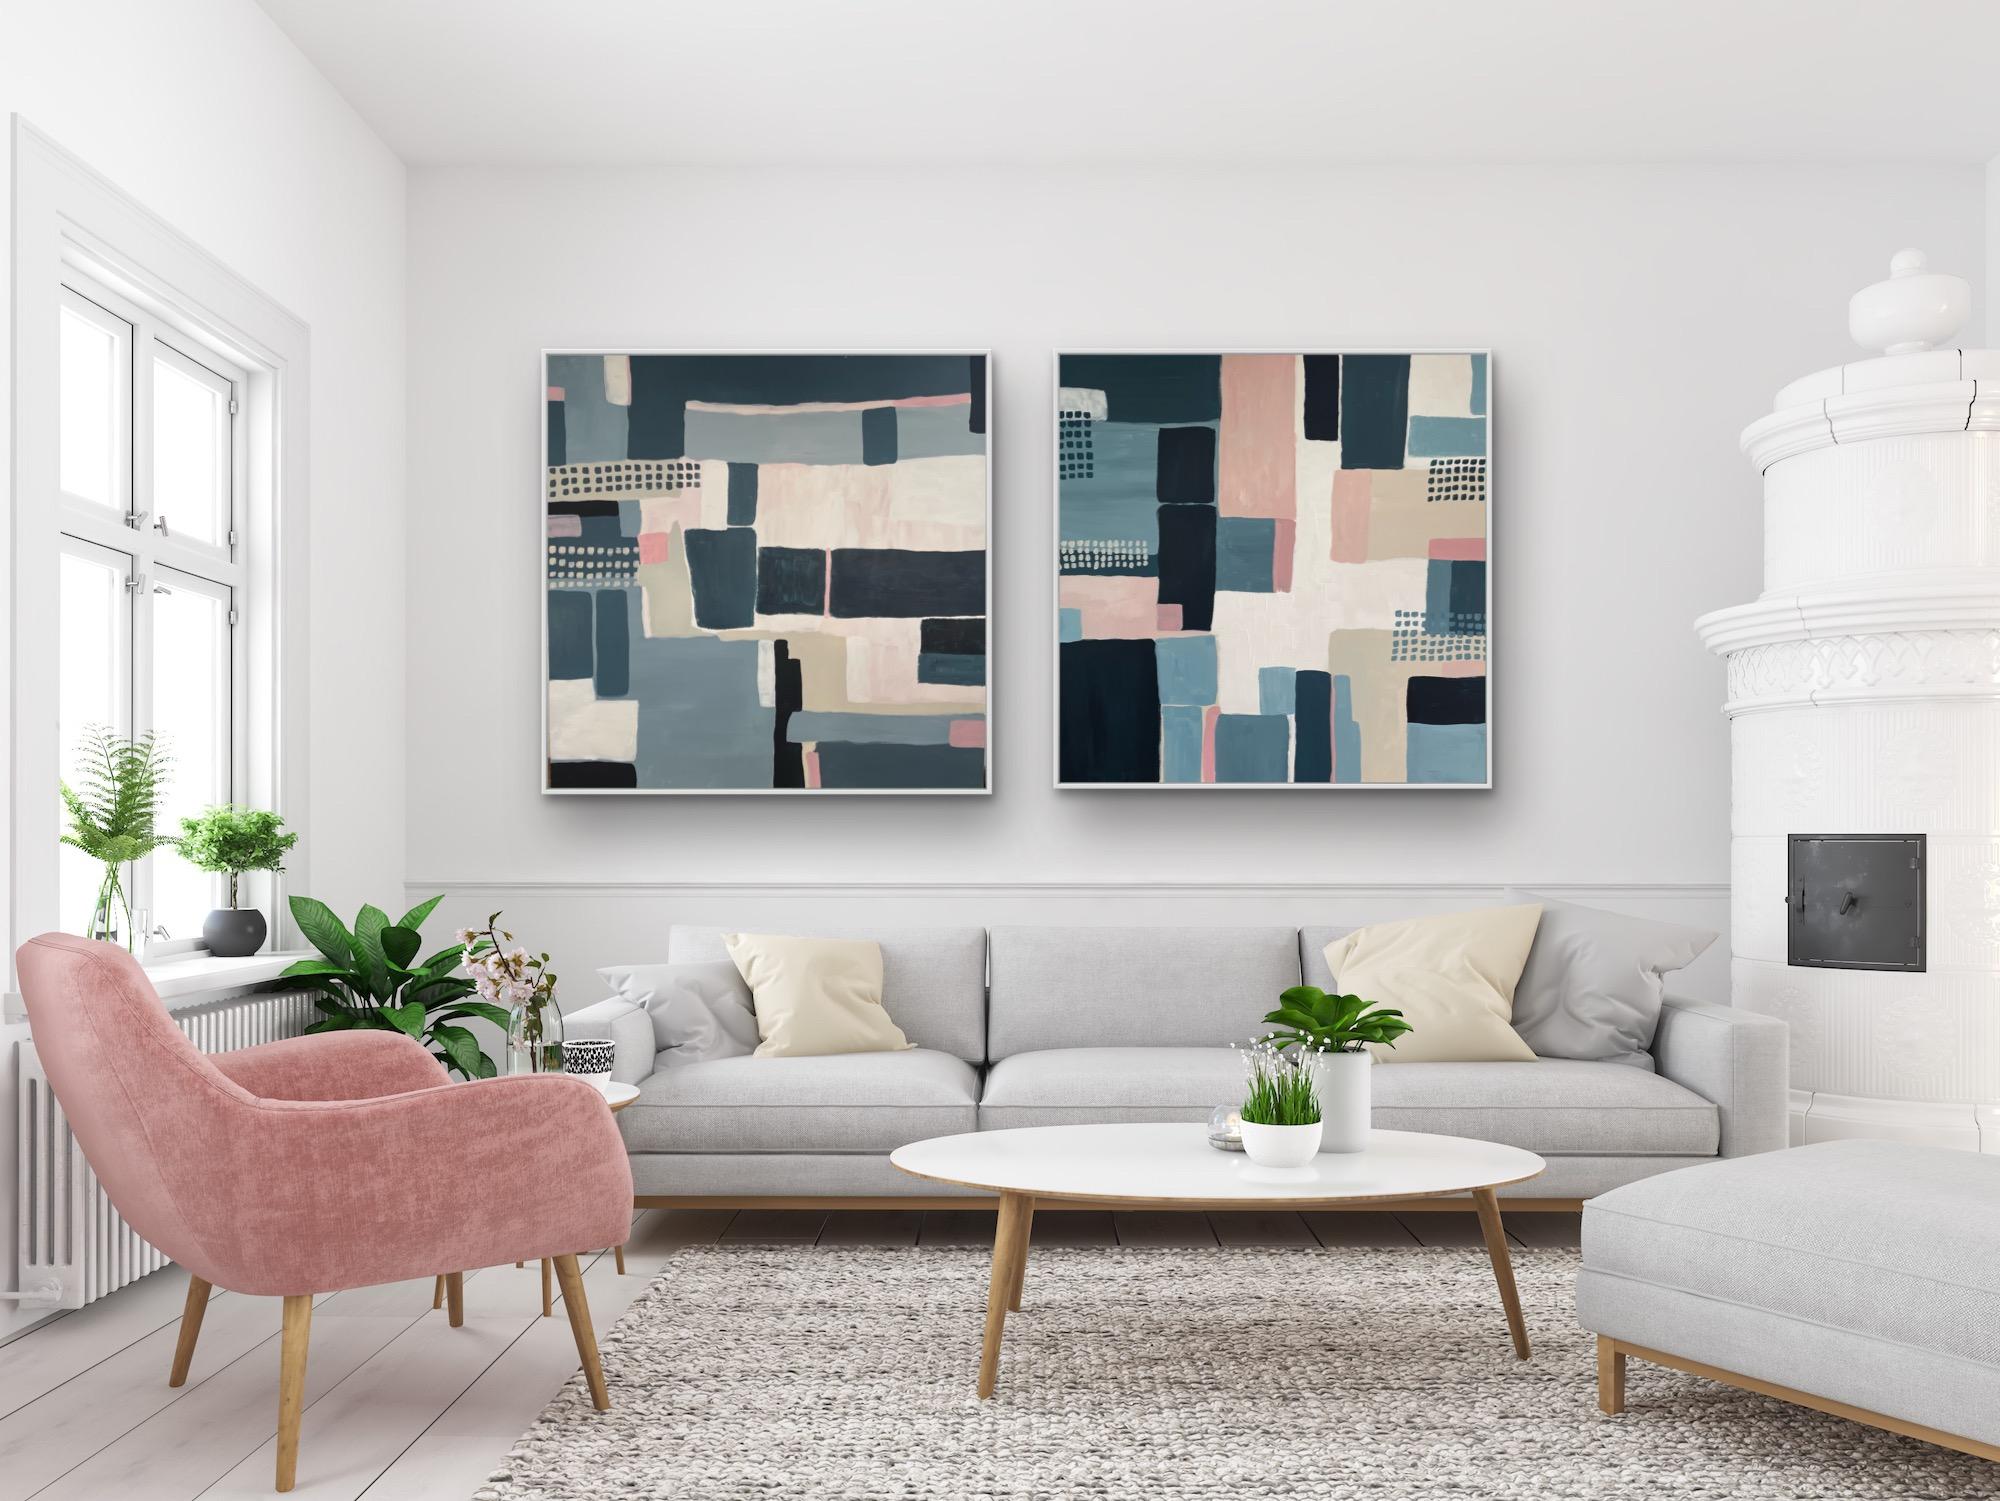 Field Patterns Diptych Acrylic on Canvas Painting by Fleur Park, 2022 - Gray Abstract Painting by Fleur park